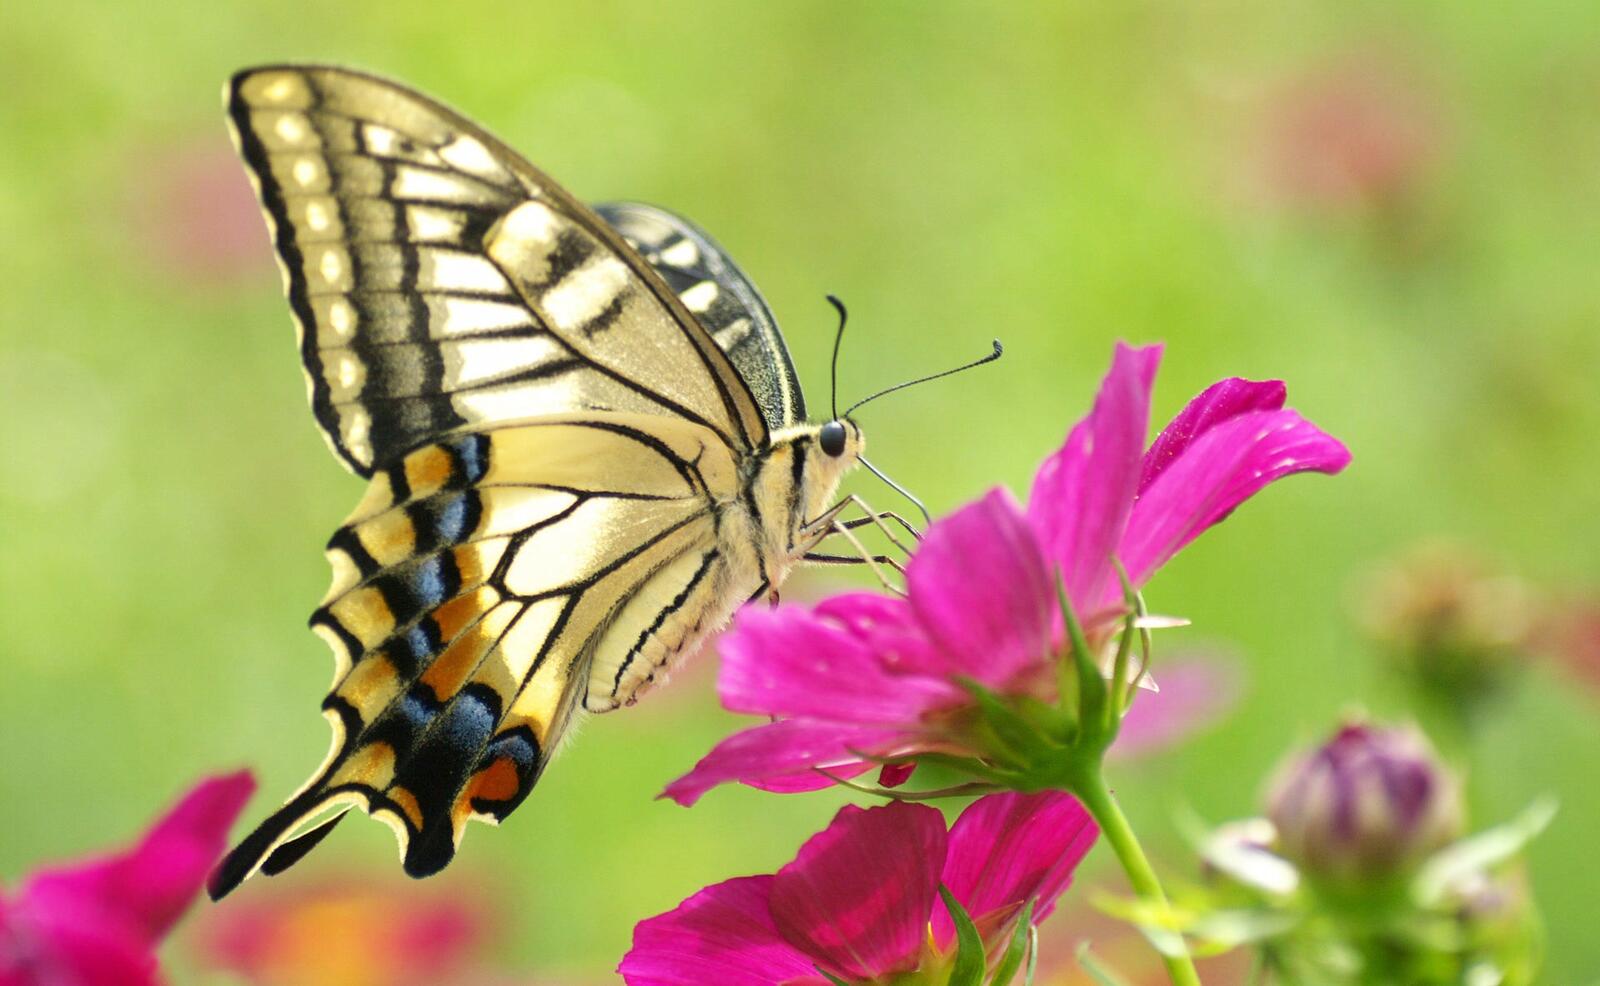 Free photo A brightly colored butterfly on a flower